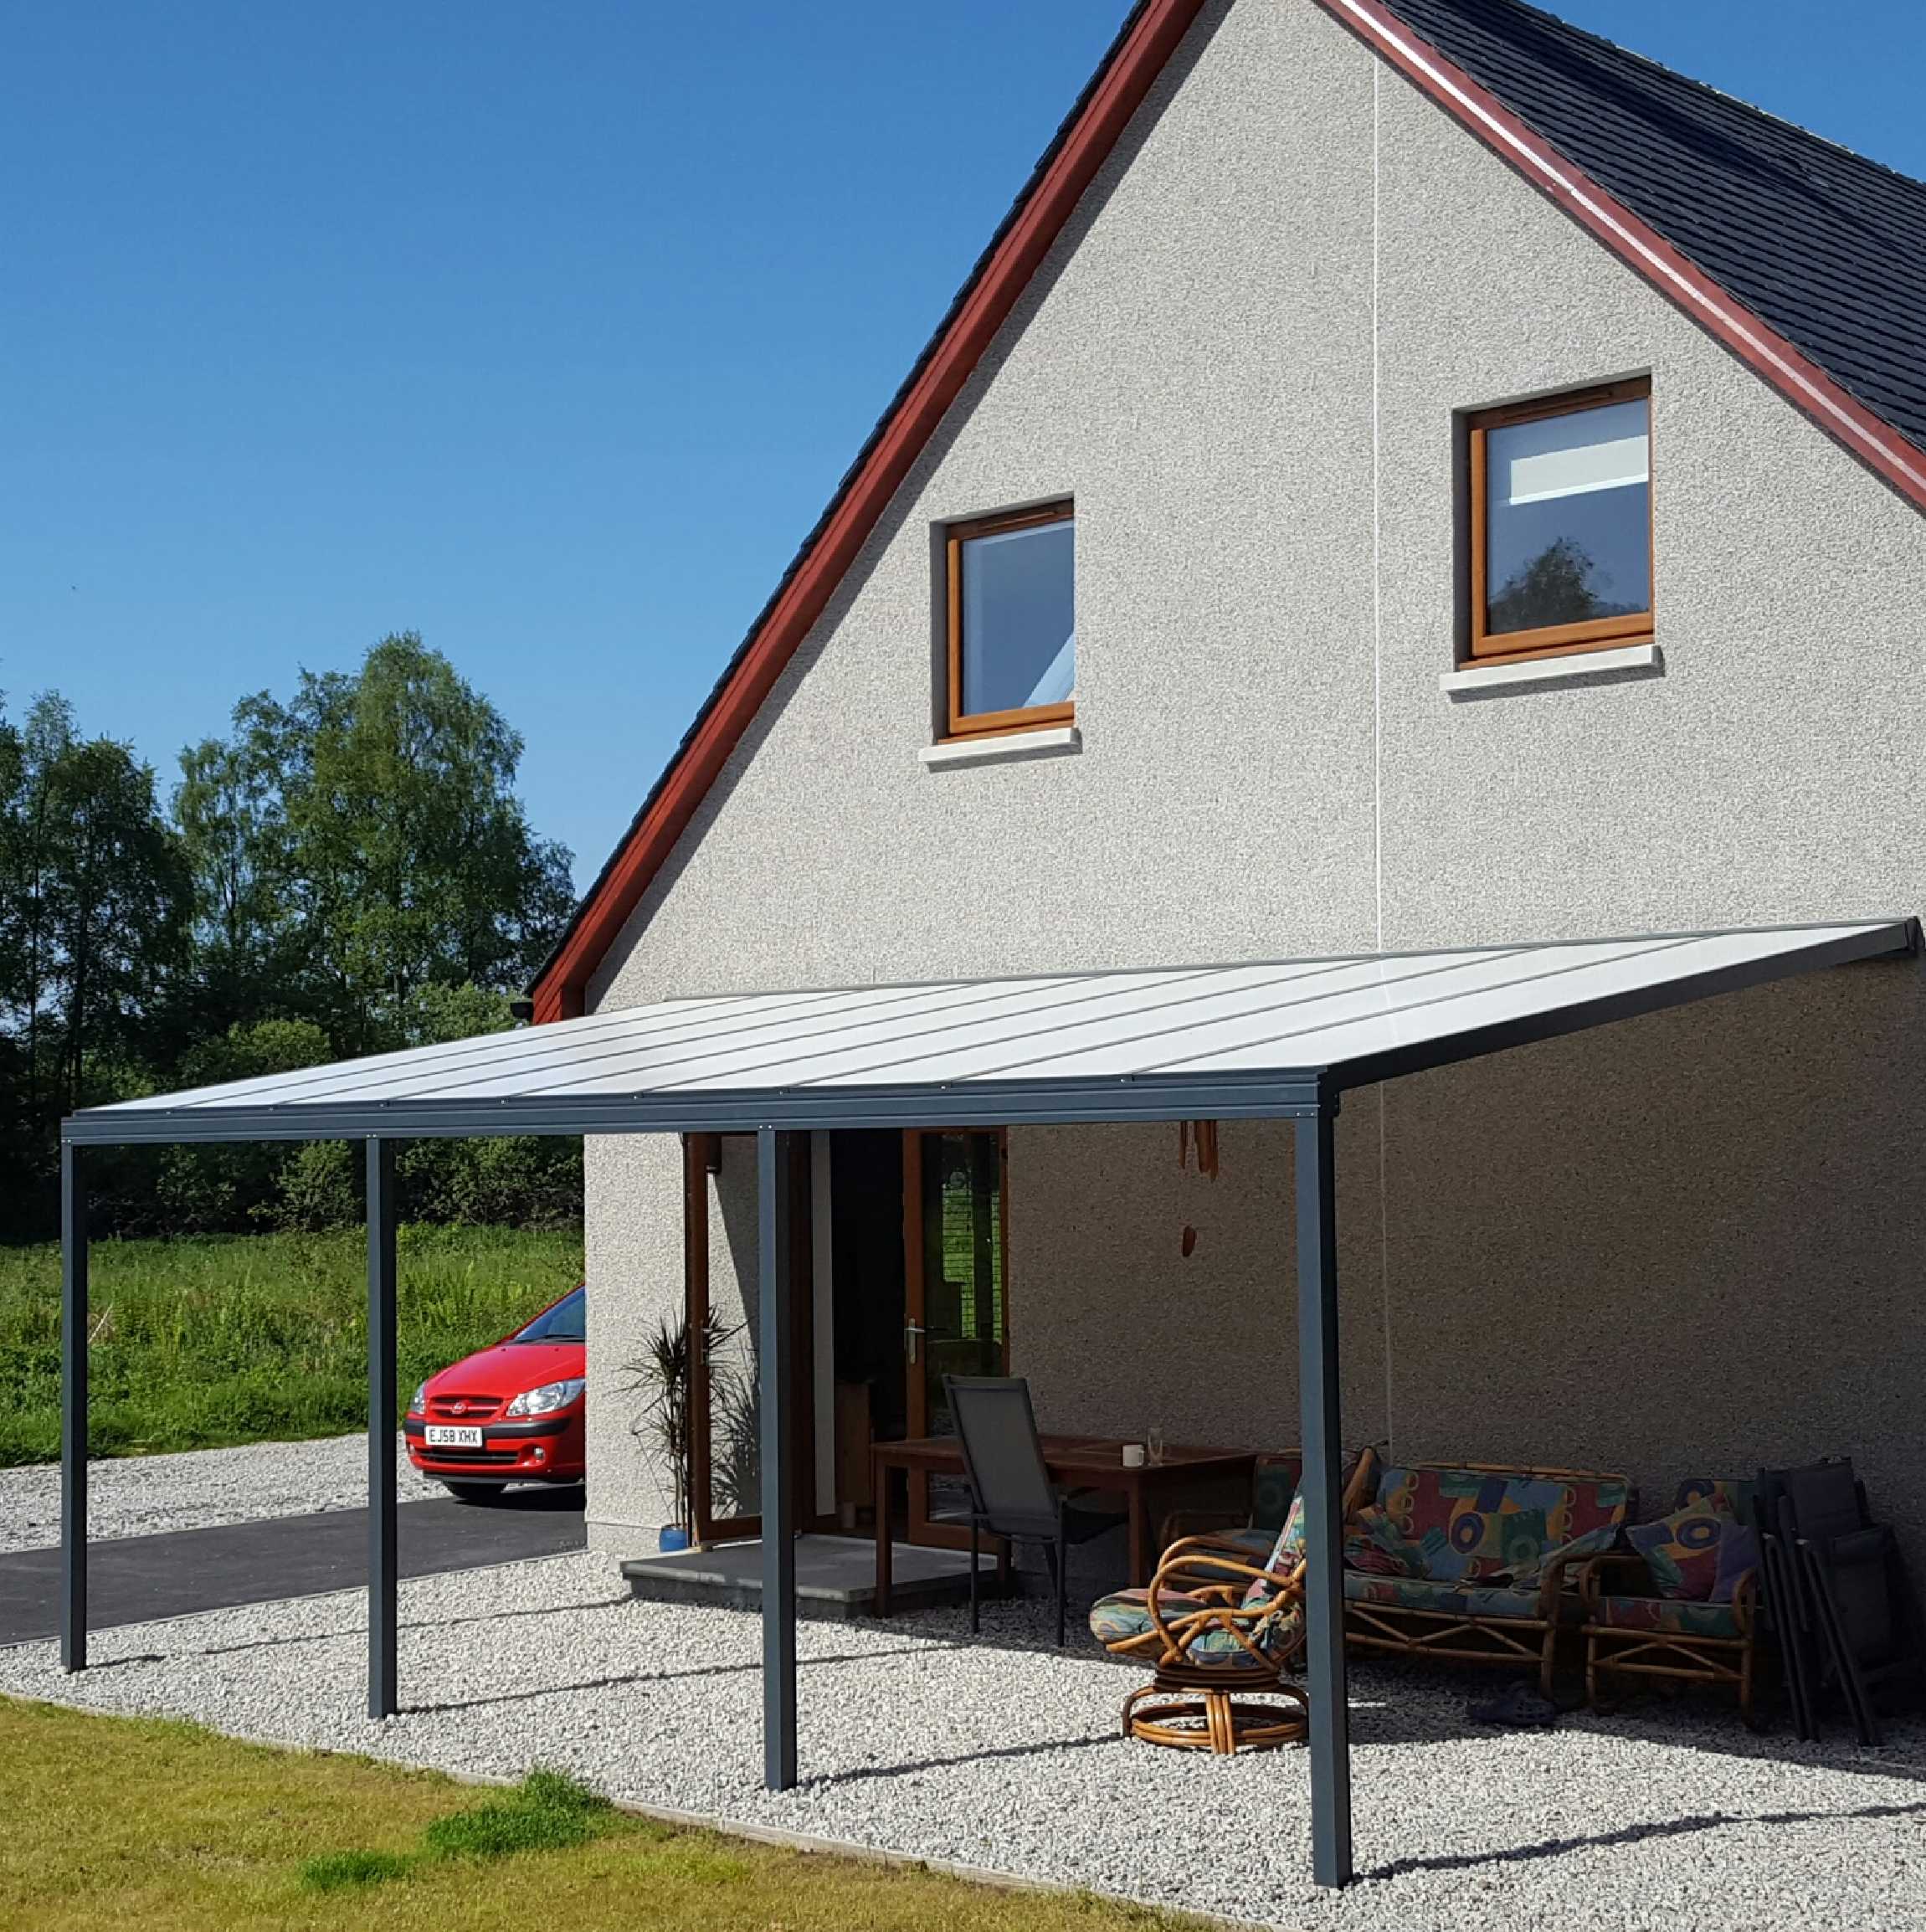 Great selection of Omega Smart Lean-To Canopy, Anthracite Grey, 16mm Polycarbonate Glazing - 9.2m (W) x 4.0m (P), (5) Supporting Posts